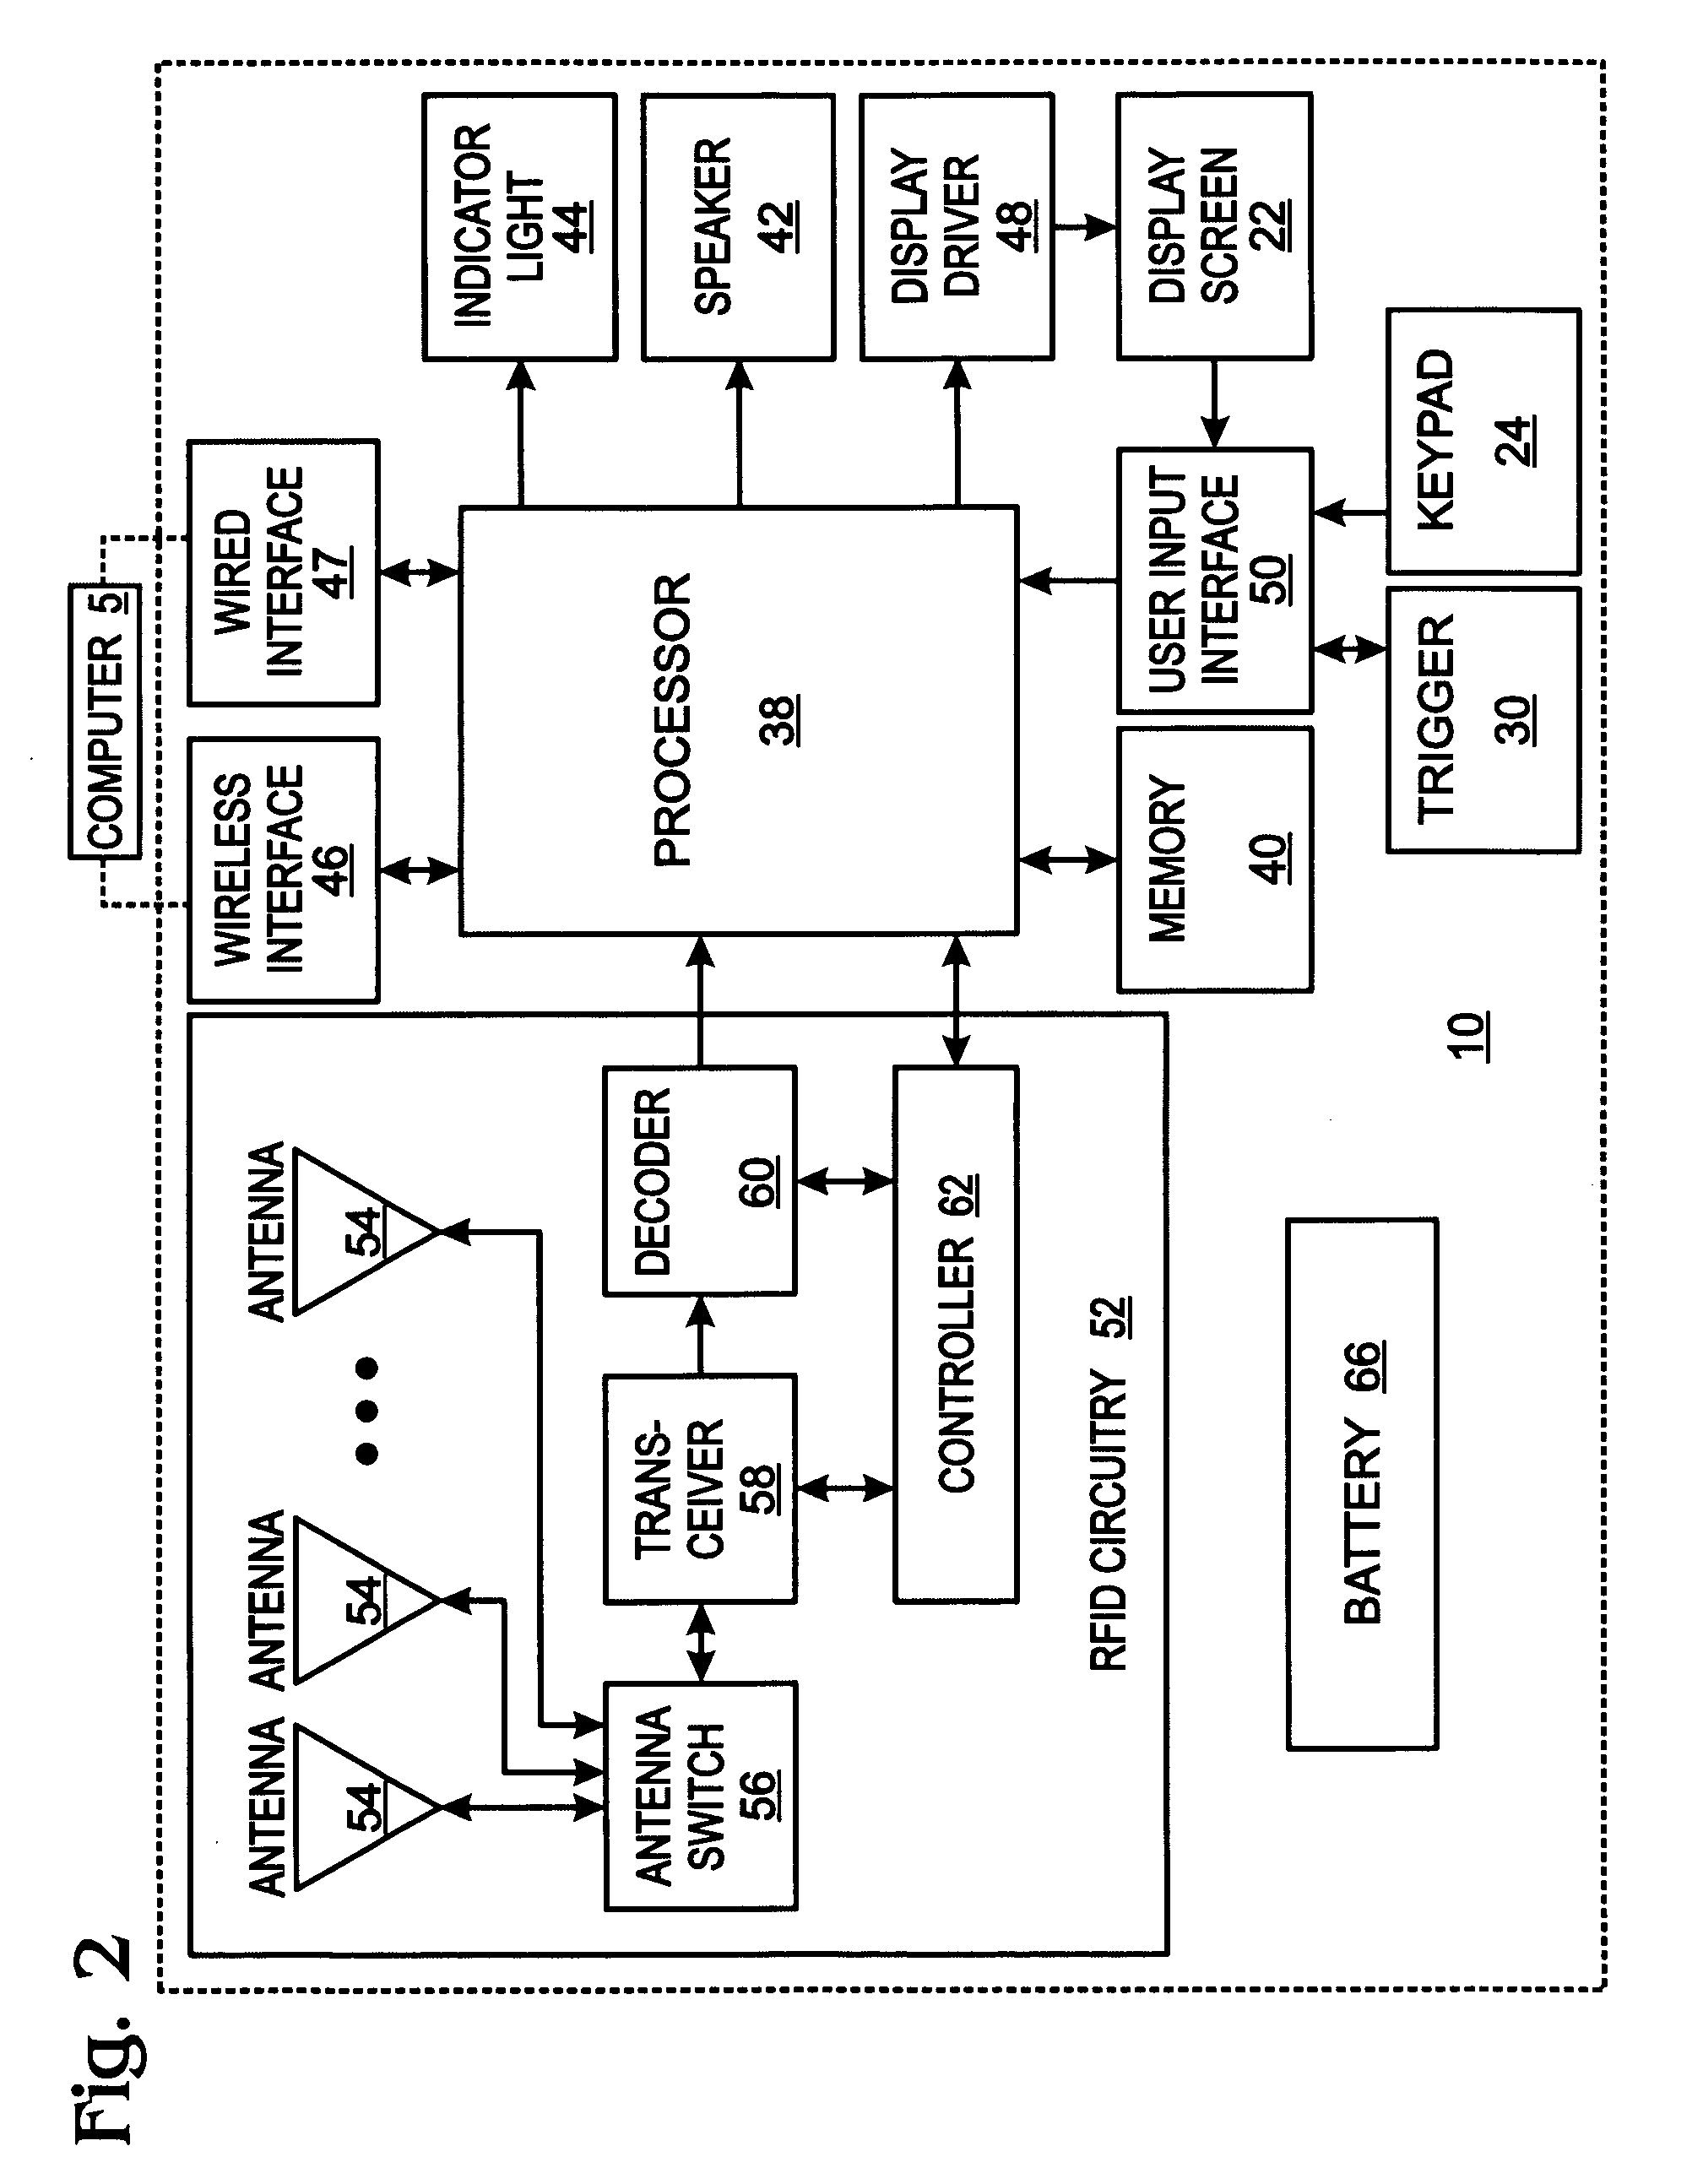 Apparatus and methods for saving power in RFID readers